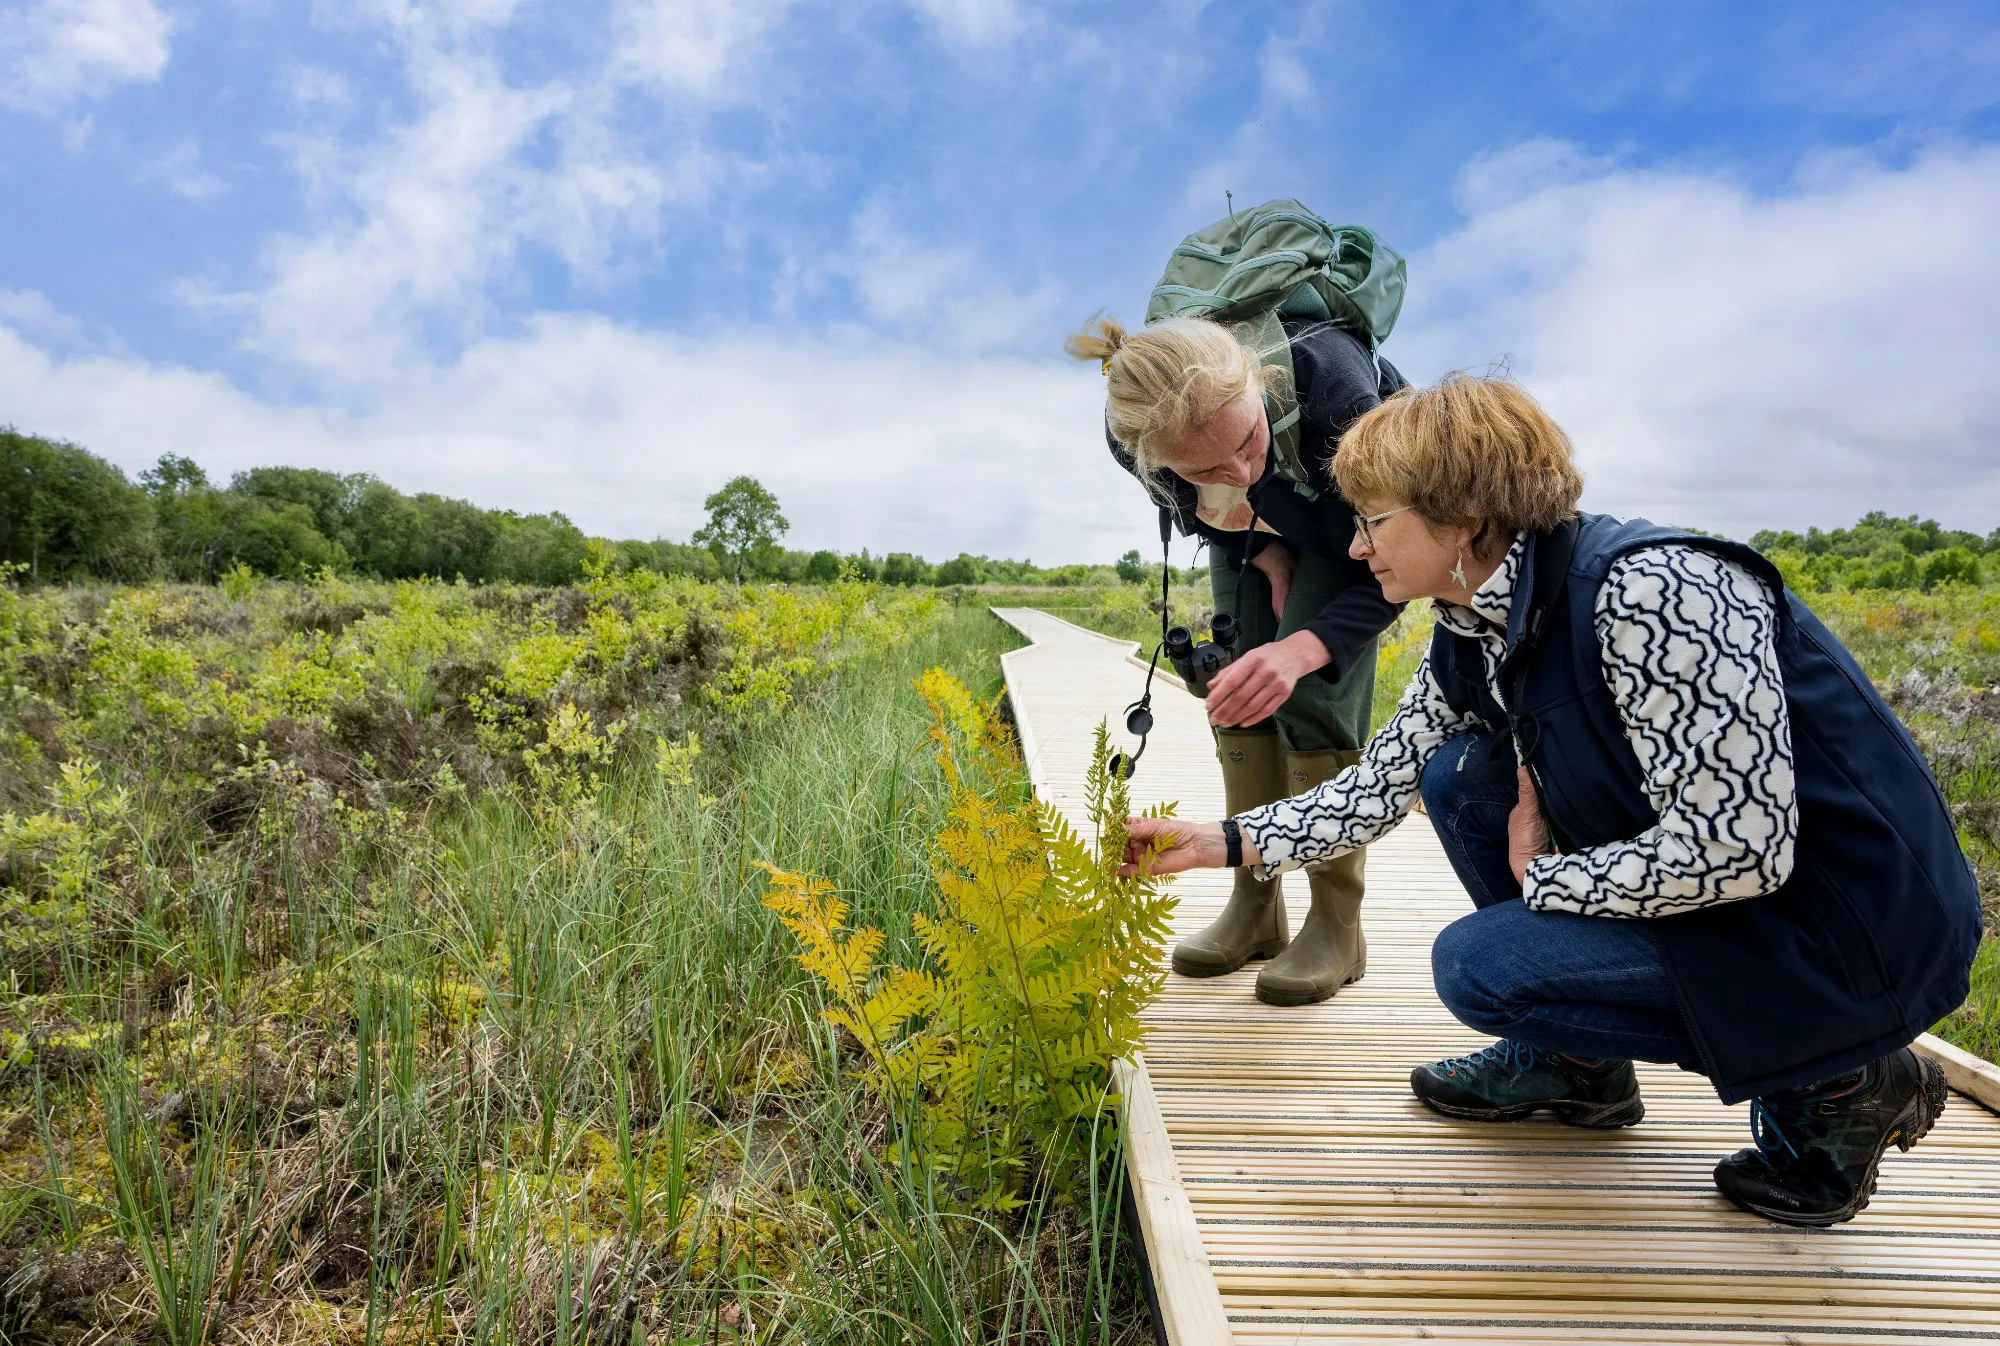 Two volunteers looking at plants of a path at RSPB Montiaghs Moss Nature Reserve, Country Antrim, Northern Ireland